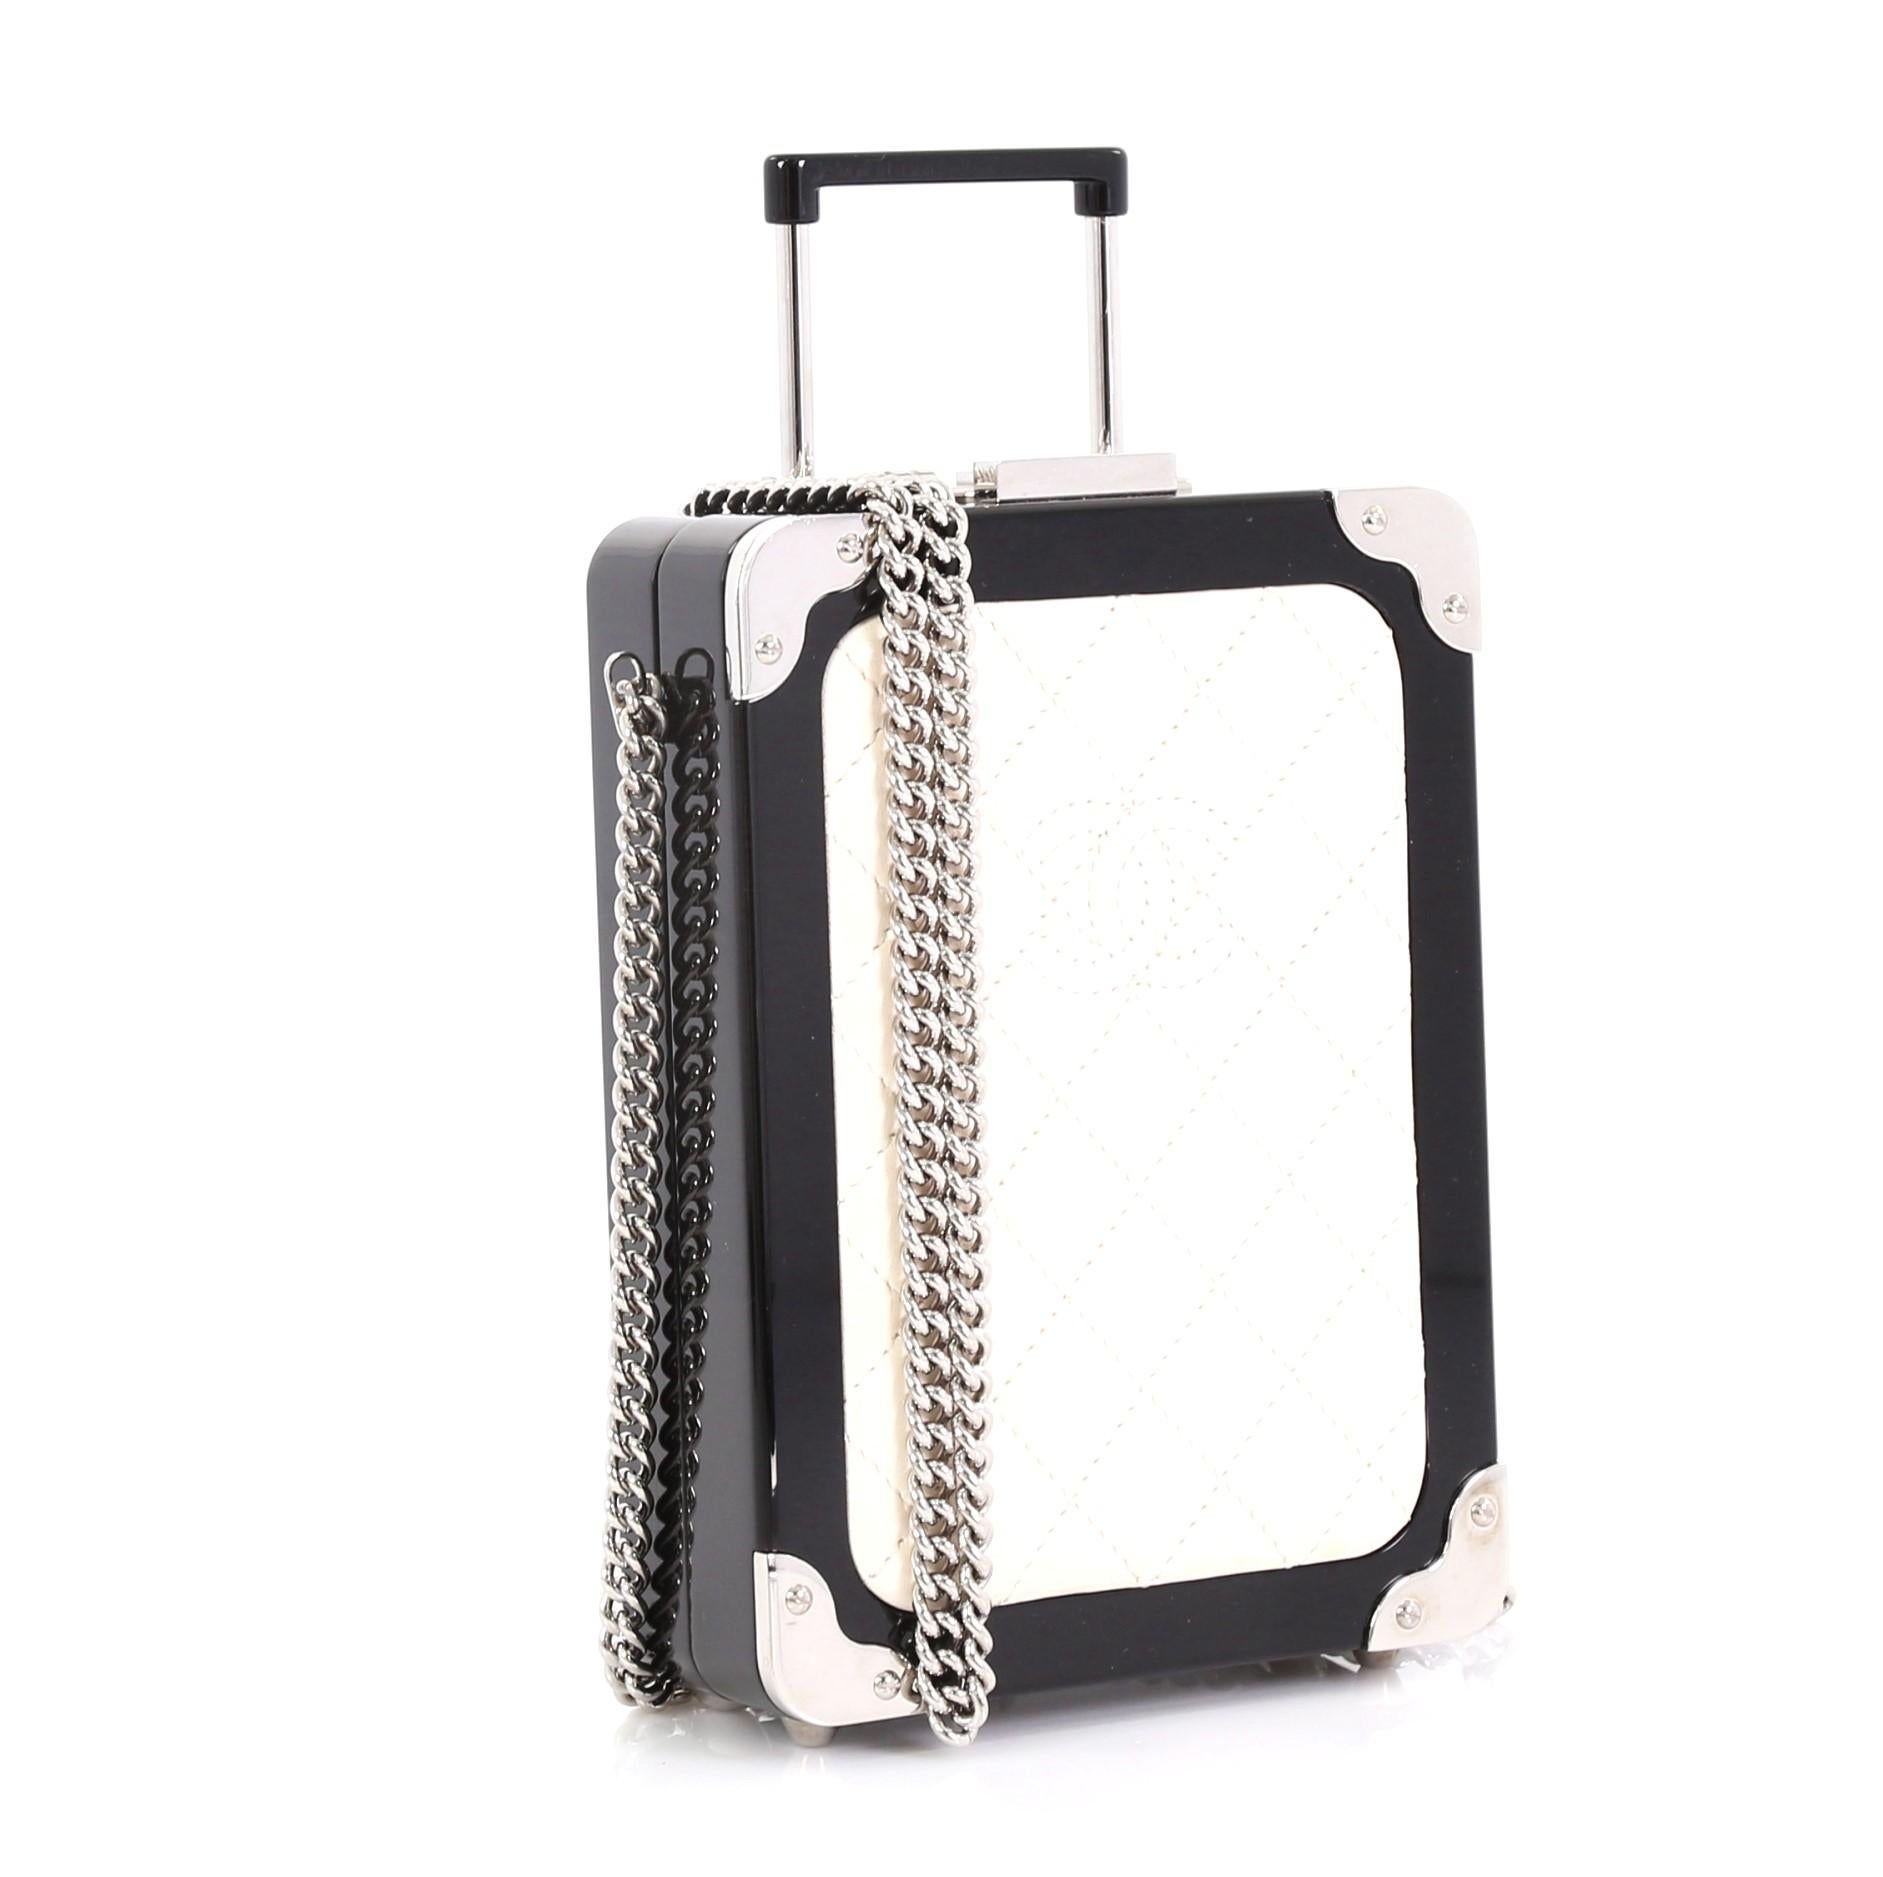 This Chanel Trolley Minaudiere Plexiglass and Quilted Lambskin, crafted from black plexiglass and white quilted lambskin leather, features chain-link crossbody strap, rolling suitcase silhouette, Chanel CC logo stitched in the center and silver-tone